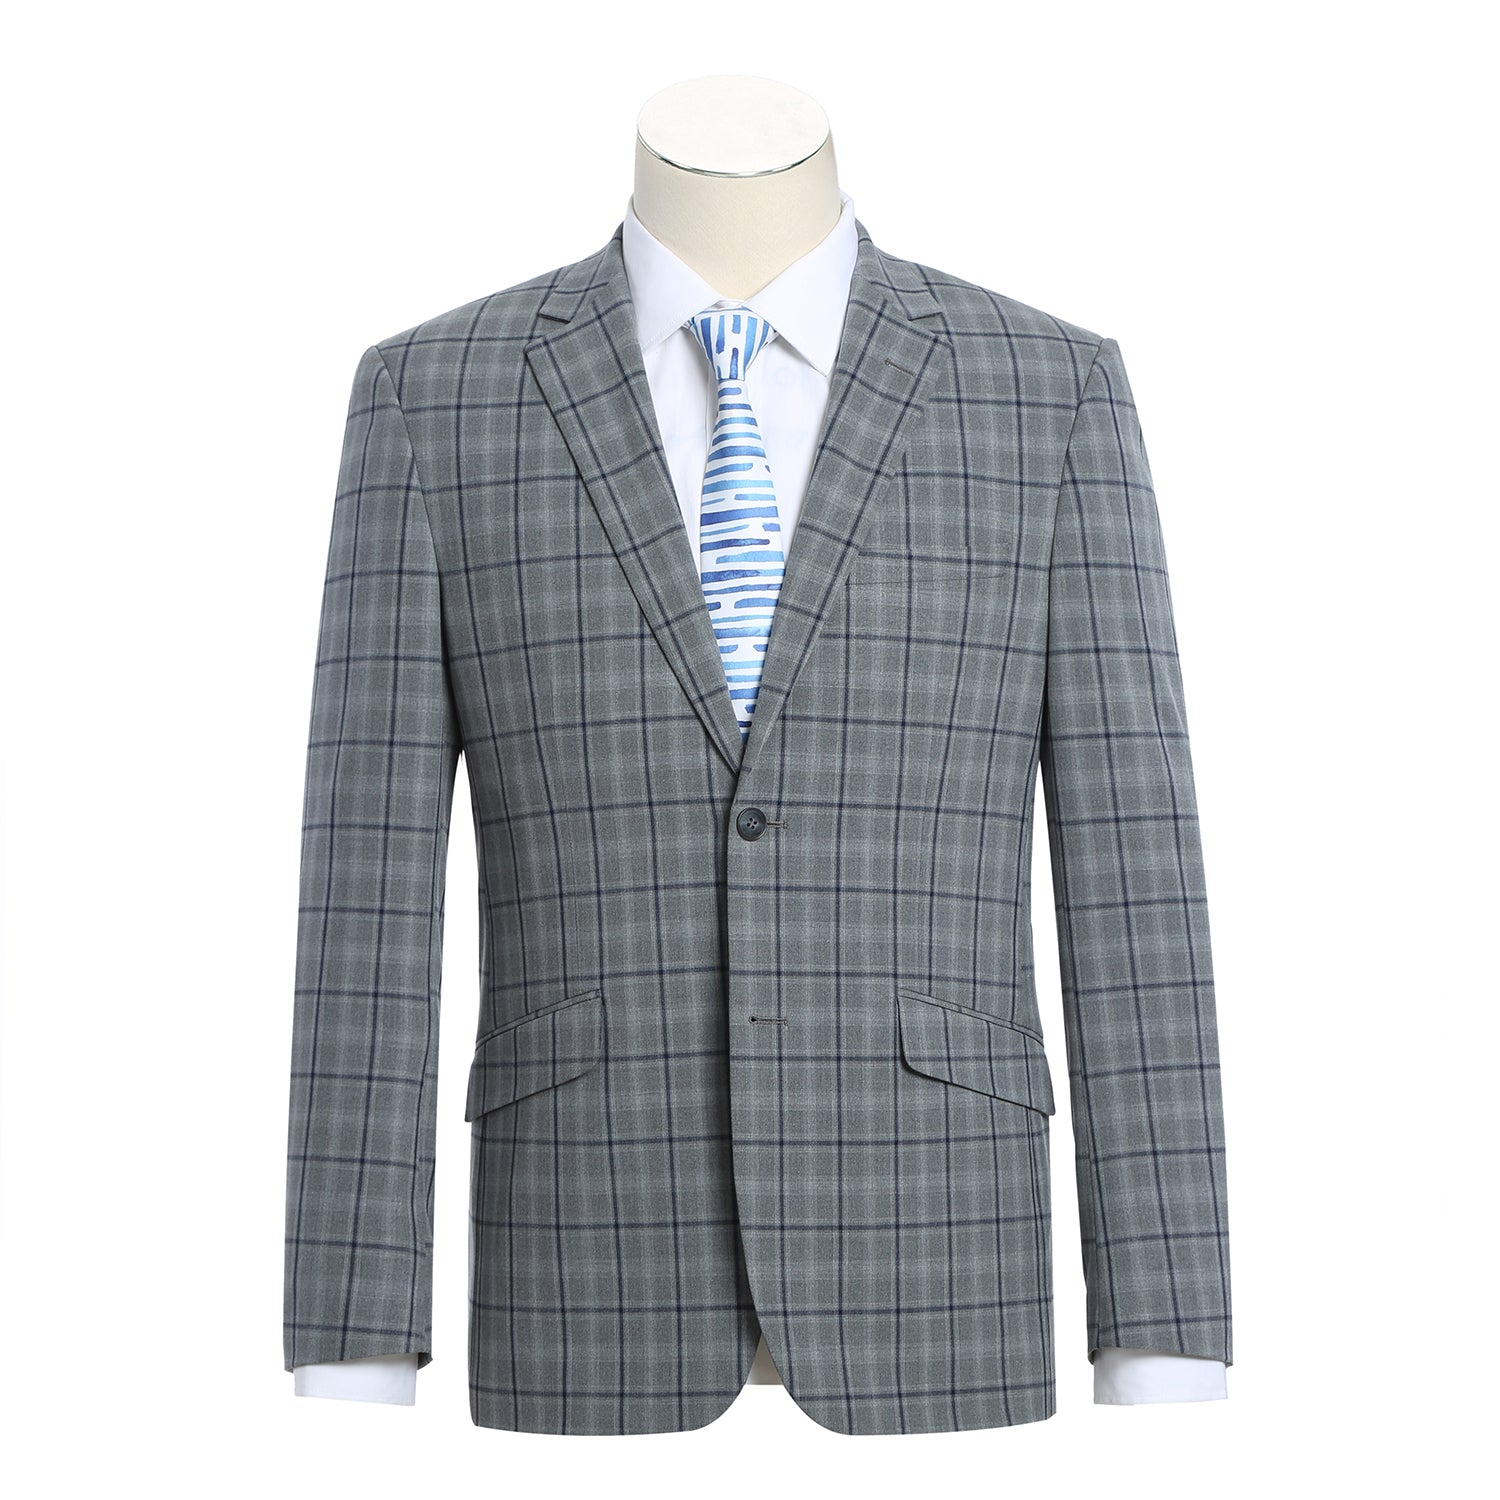 Men's Slim Fit Stretch Checked Suits